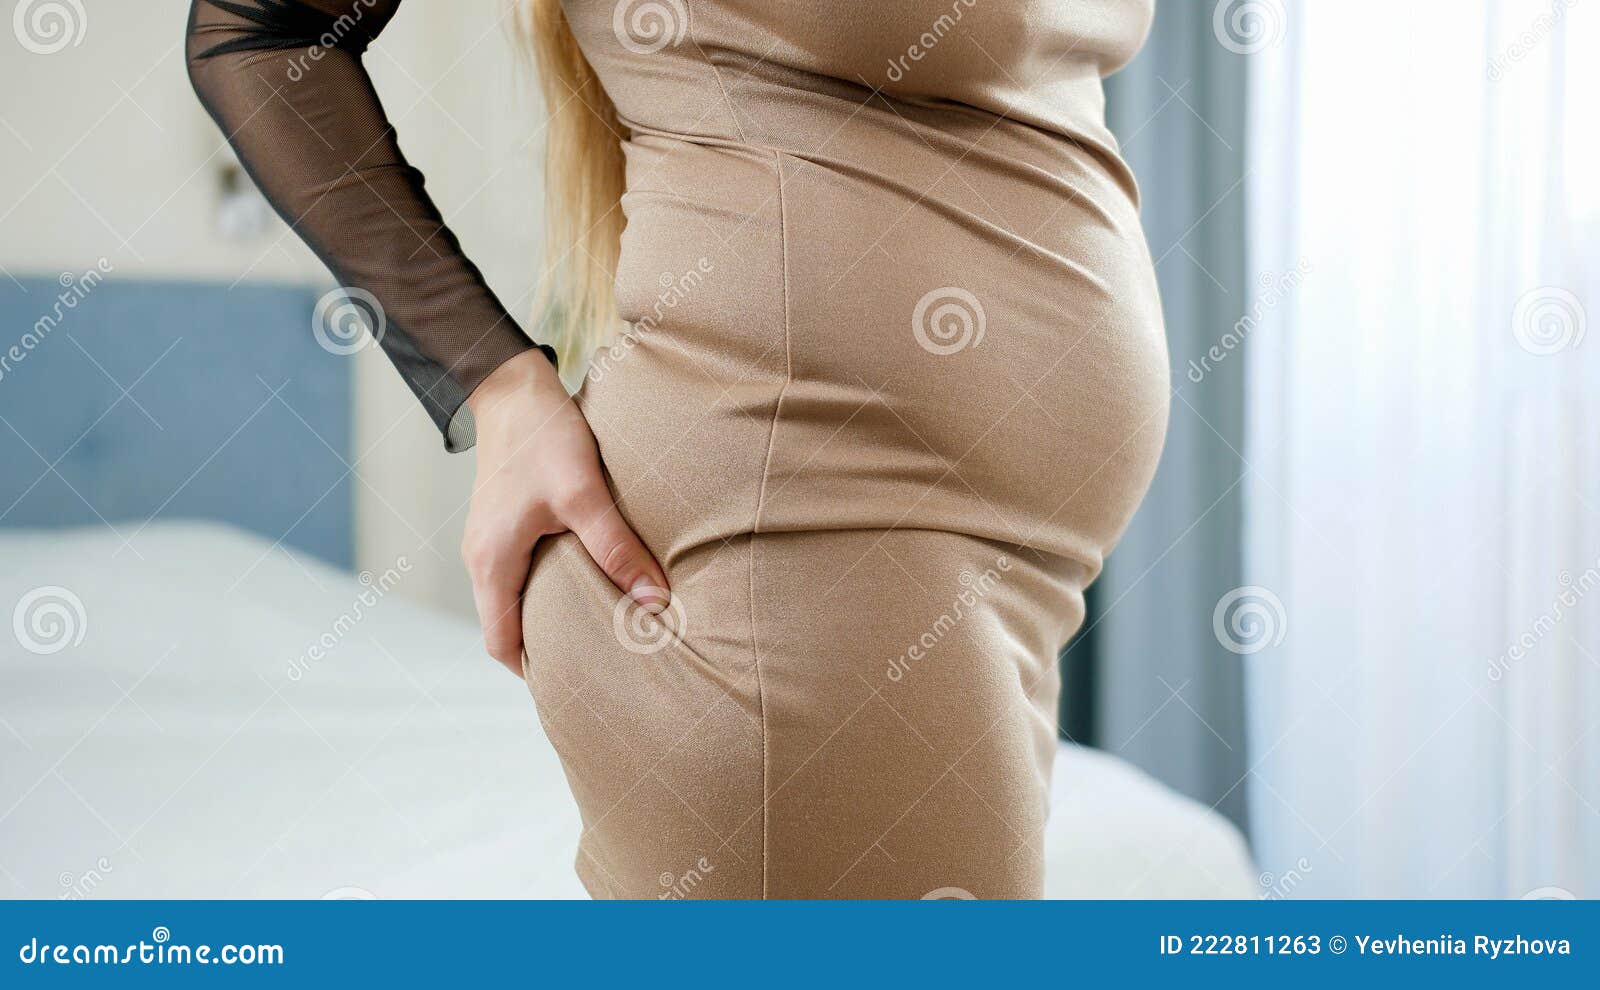 191 Fat Woman Tight Dress Stock Photos - Free & Royalty-Free Stock Photos  from Dreamstime